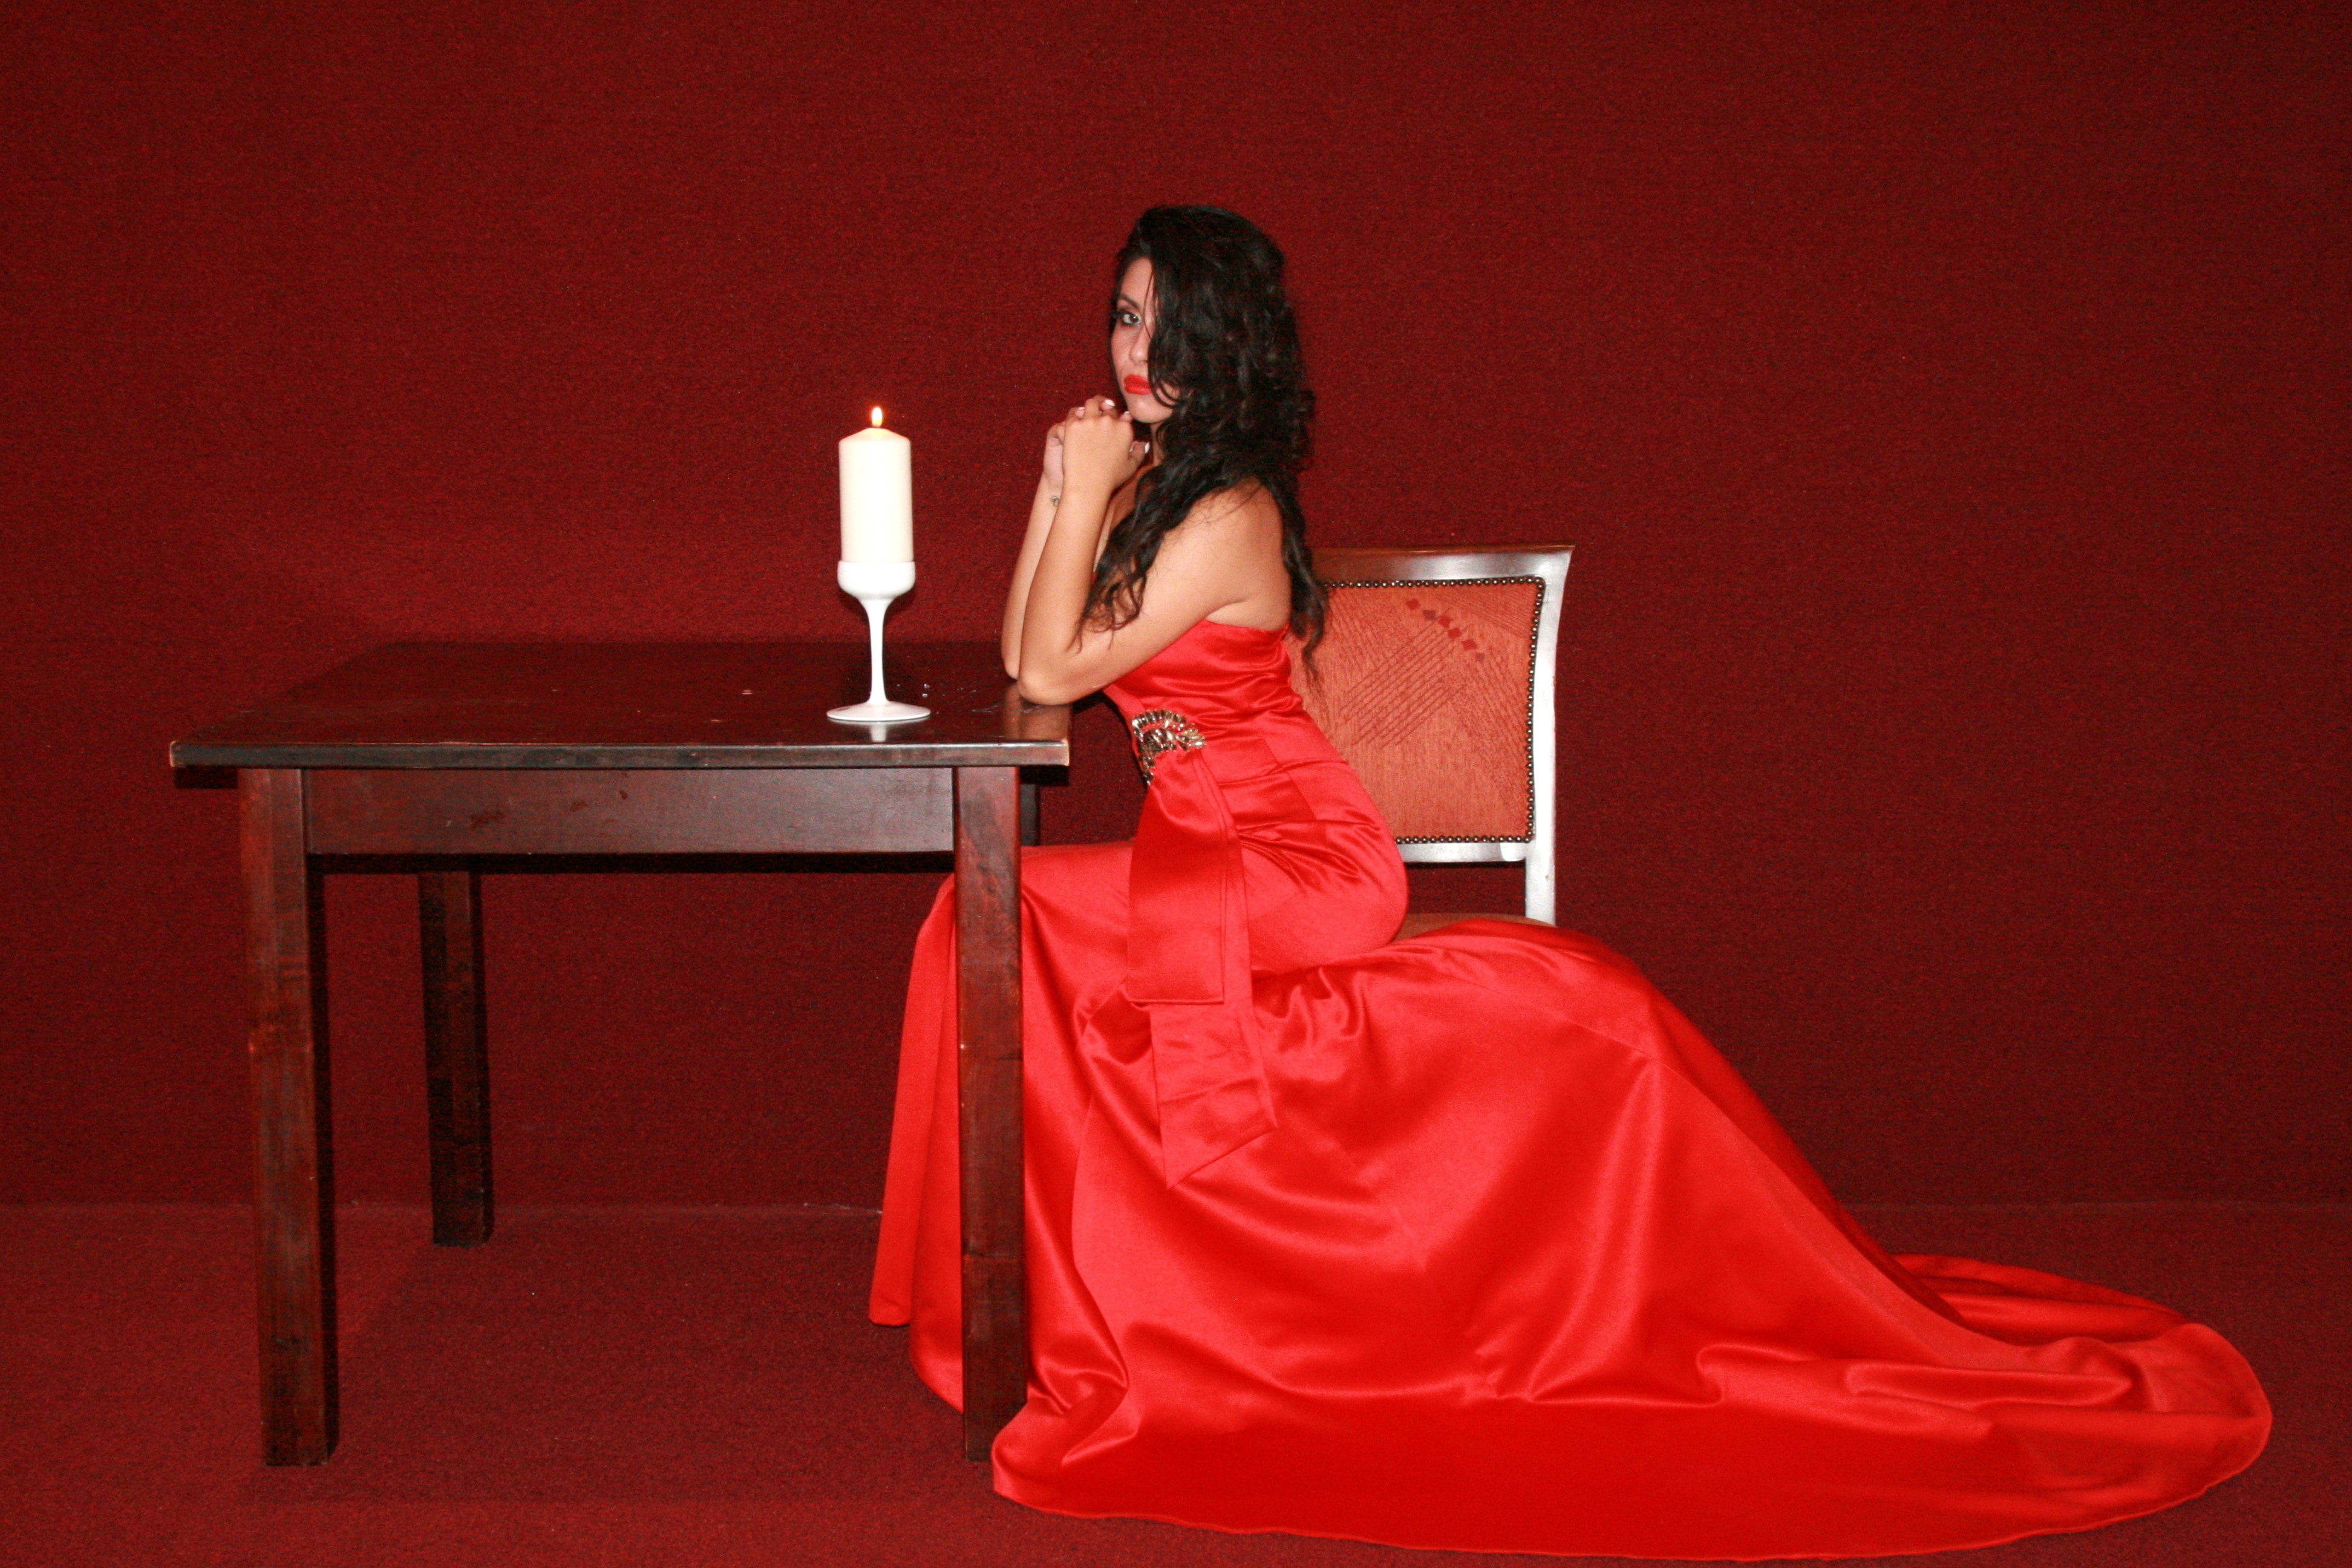 Dress, Table, Red, Girl, Lady In Red, red, evening gown